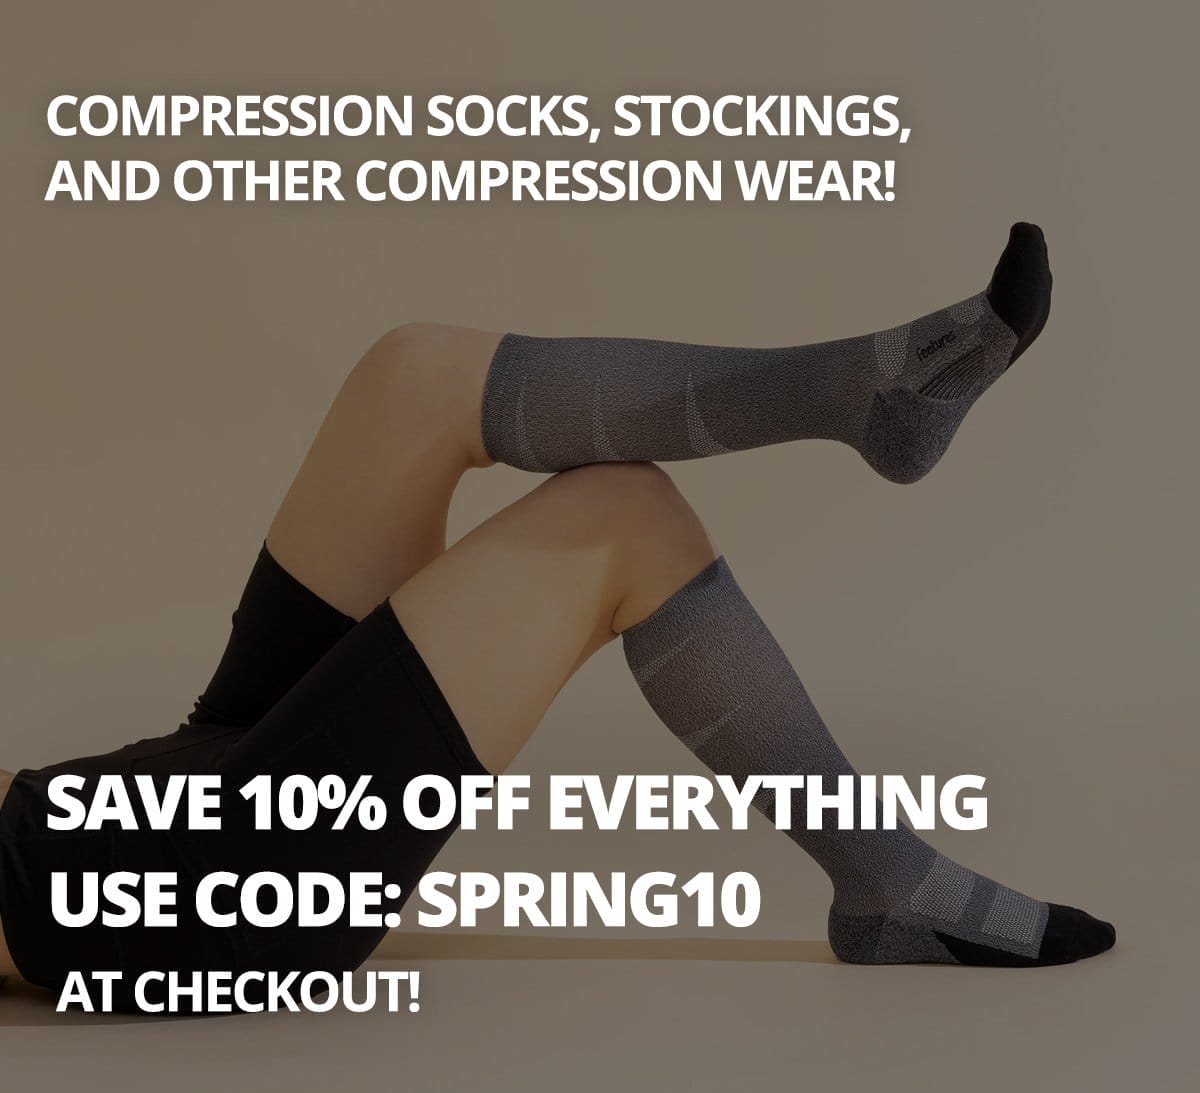 Compression socks, stockings, and other compression wear! Save 10% OFF everything. Use code: SPRING10 at checkout!